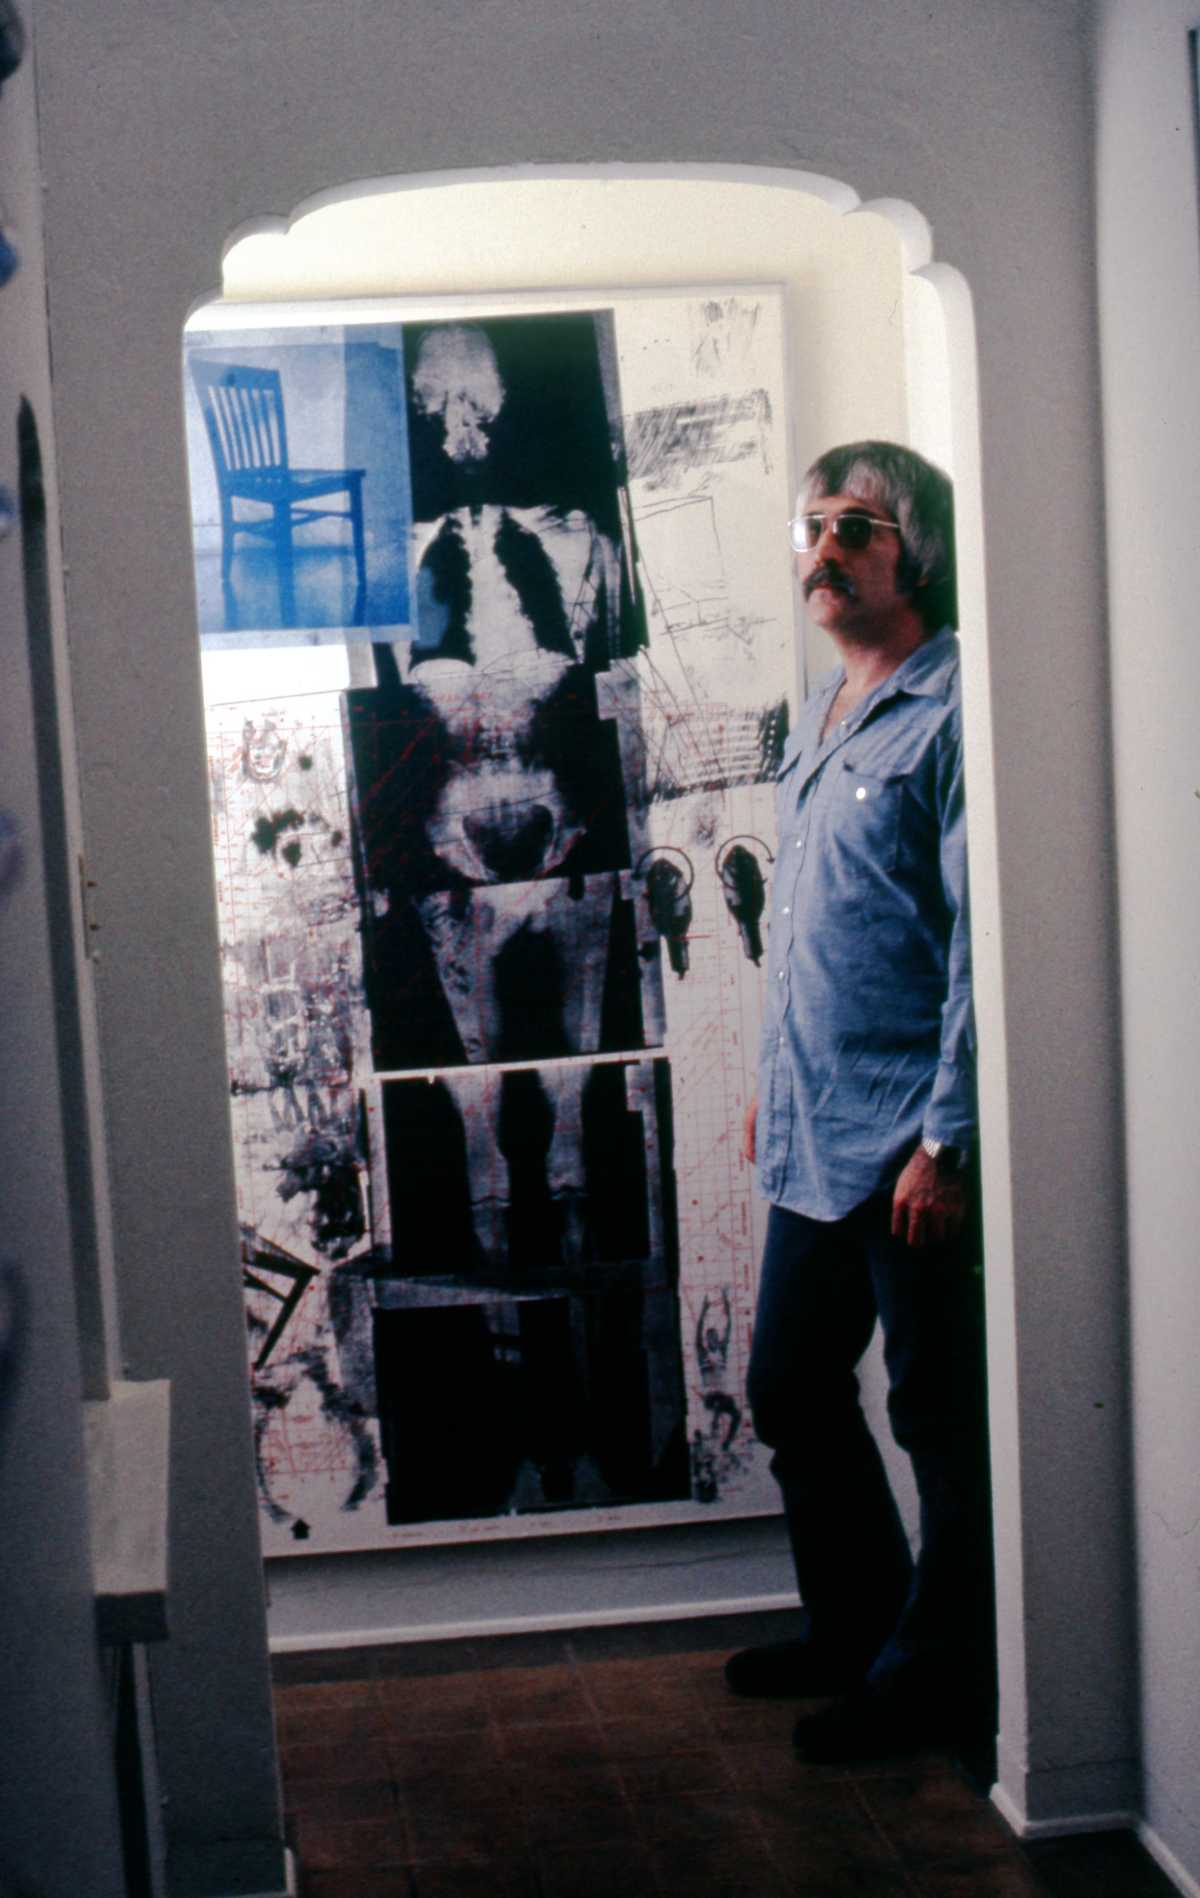 A photo of a man standing in an archway with the print artwork Booster displayed on the wall next to him